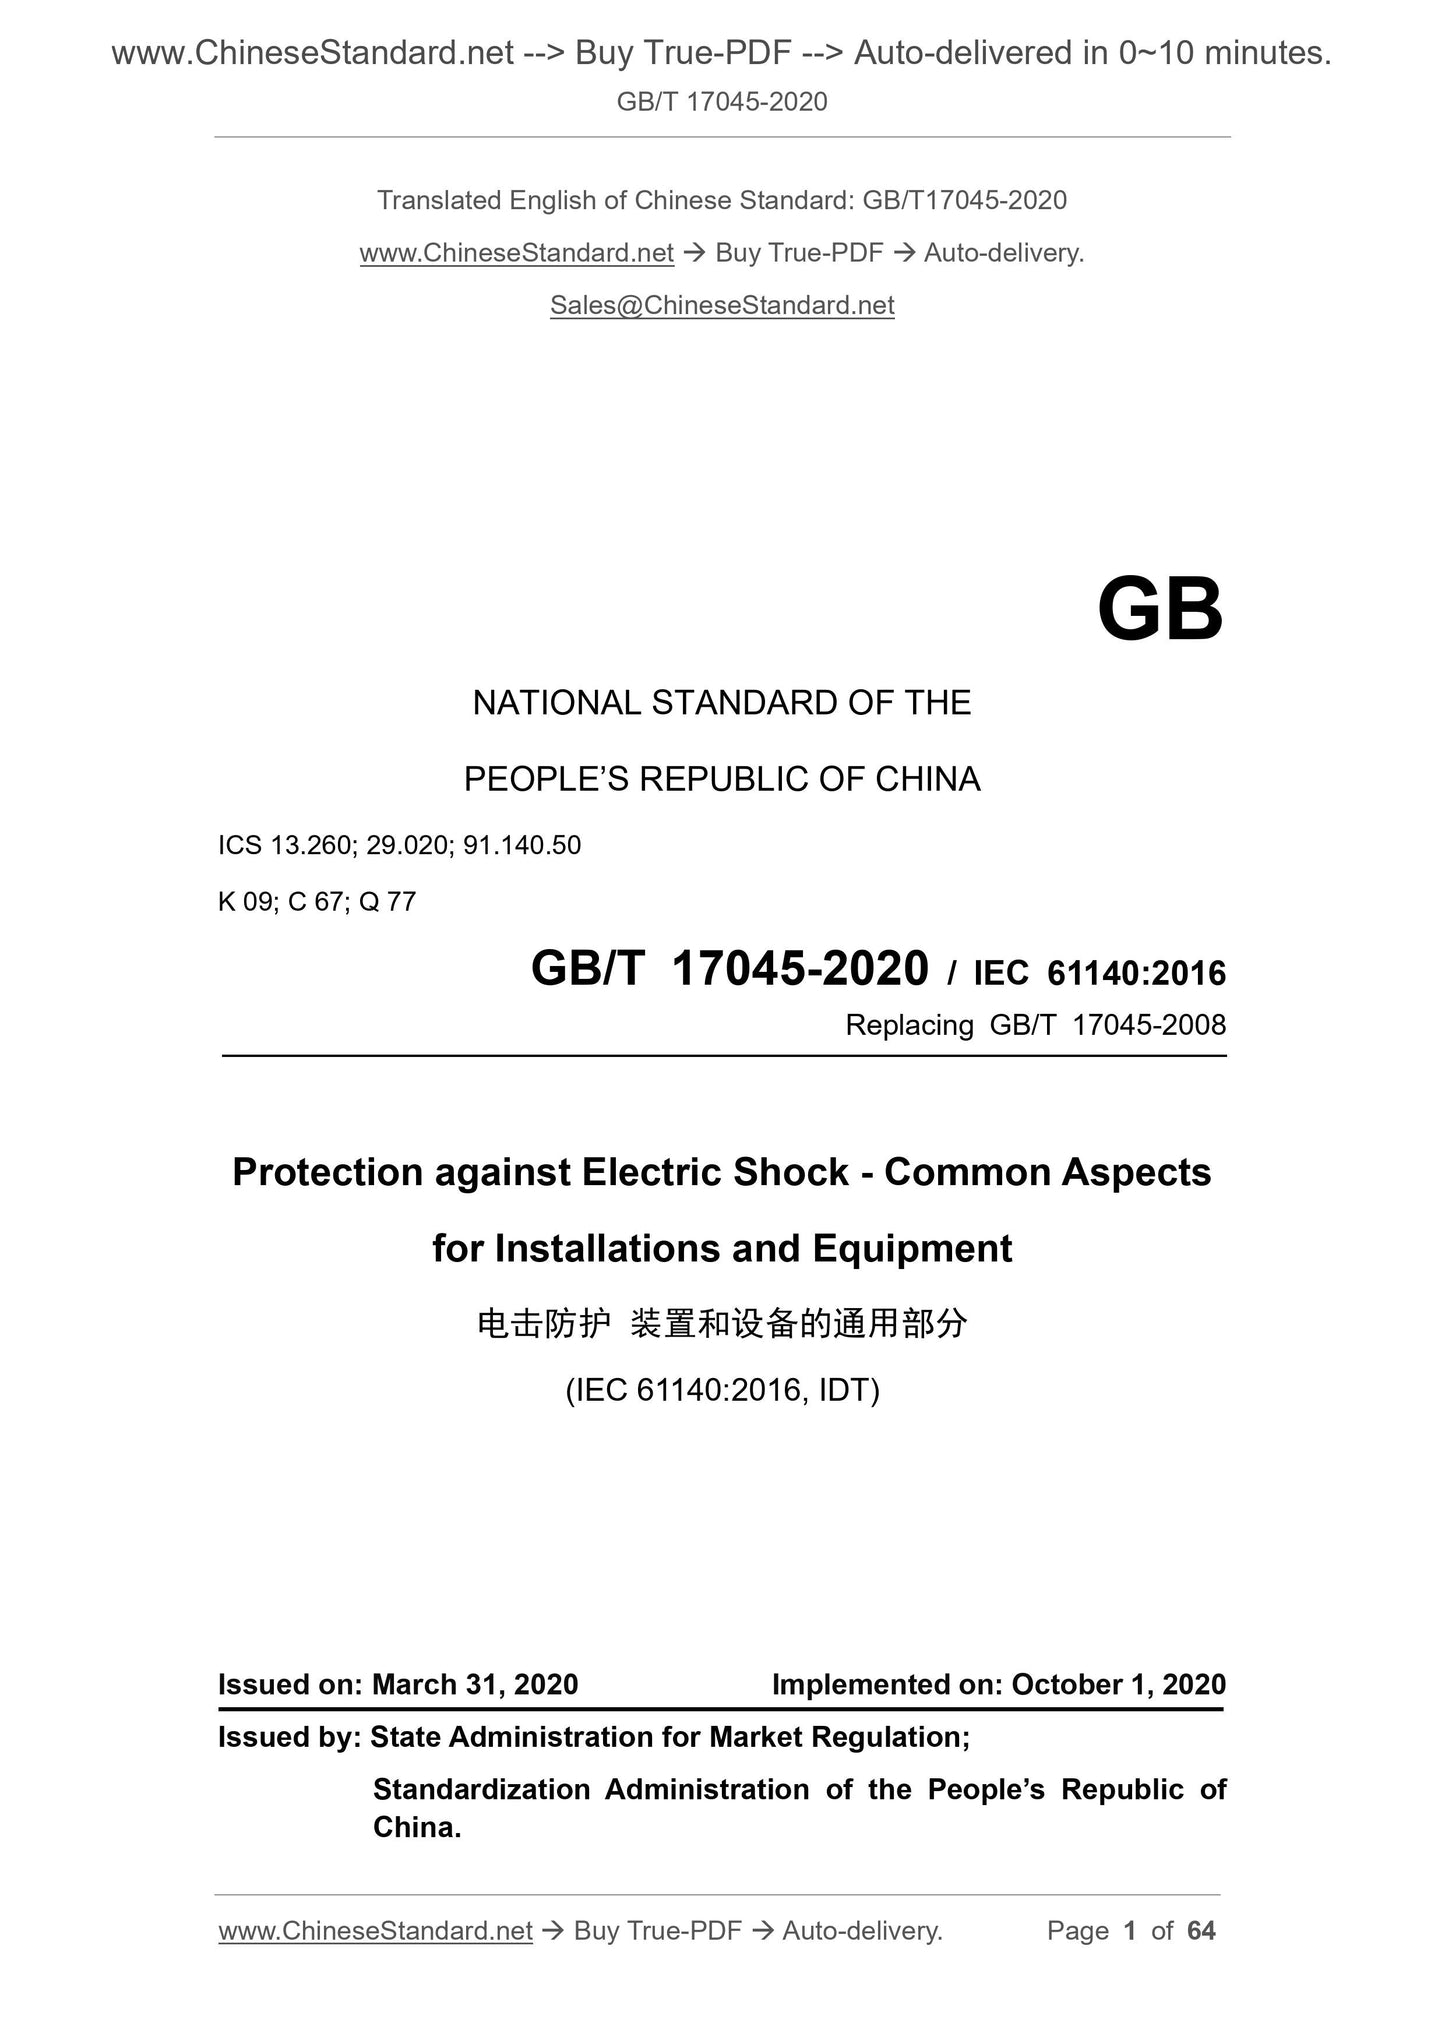 GB/T 17045-2020 Page 1